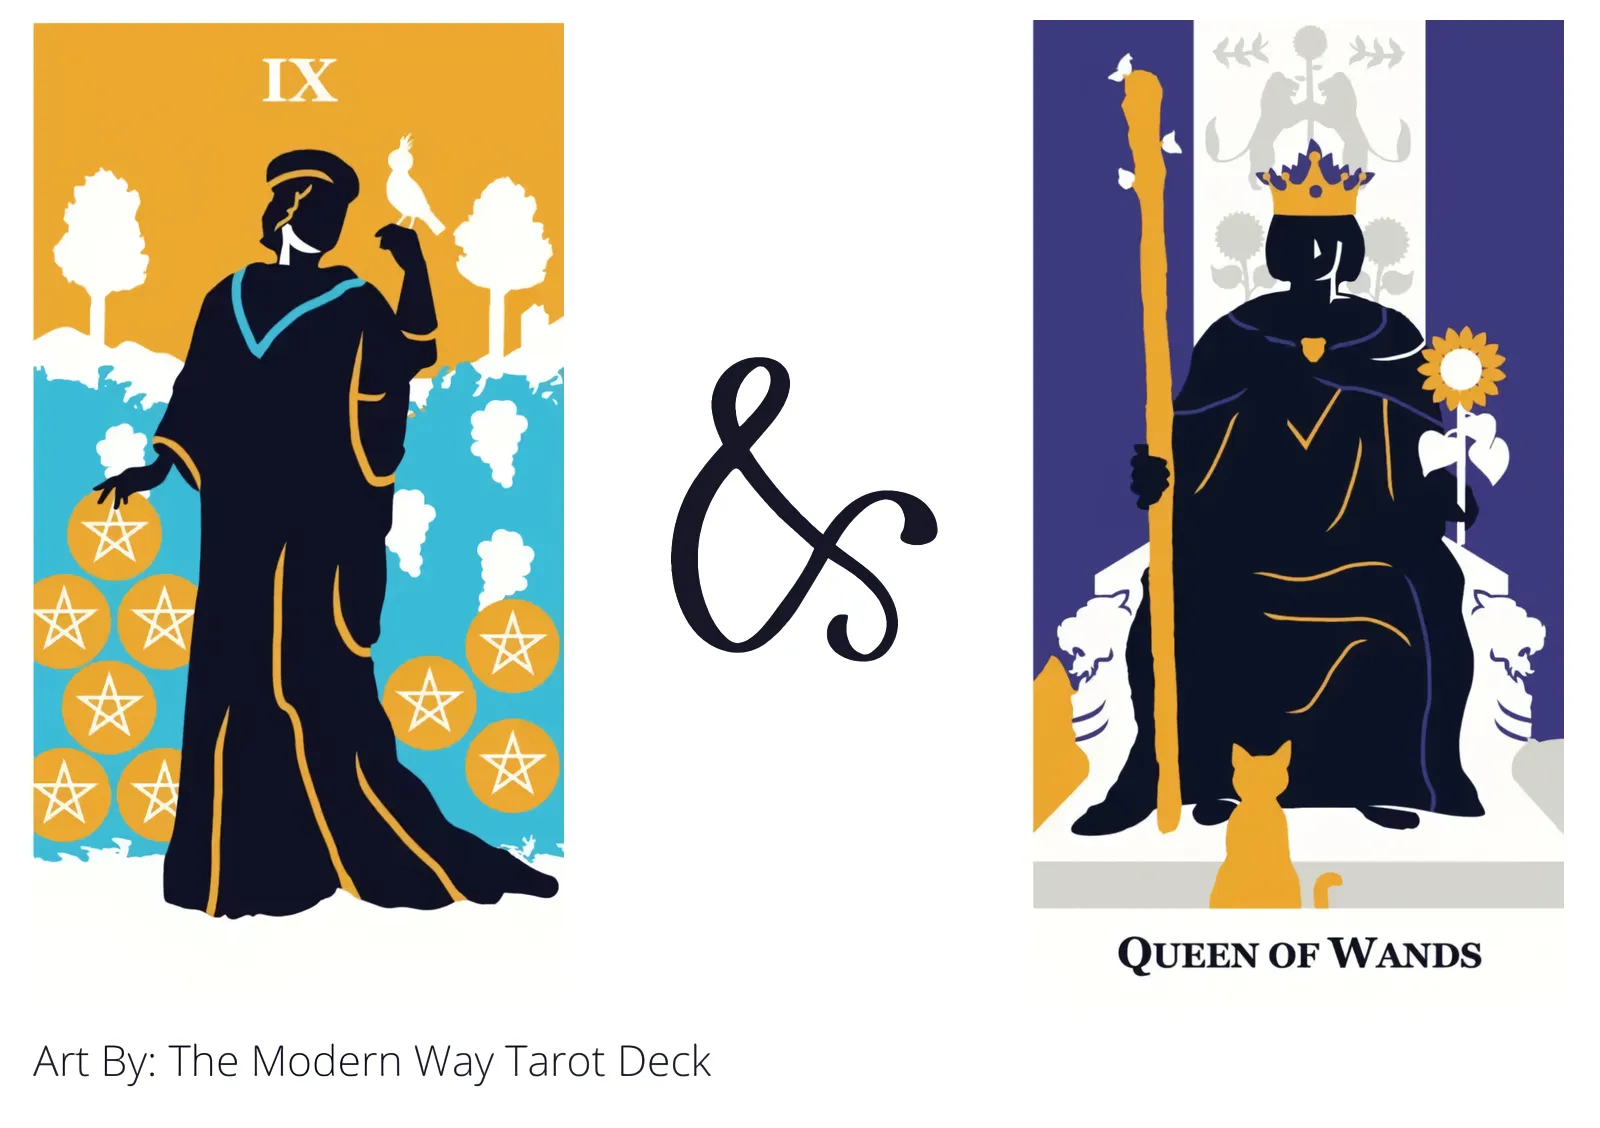 nine of pentacles and queen of wands tarot cards together